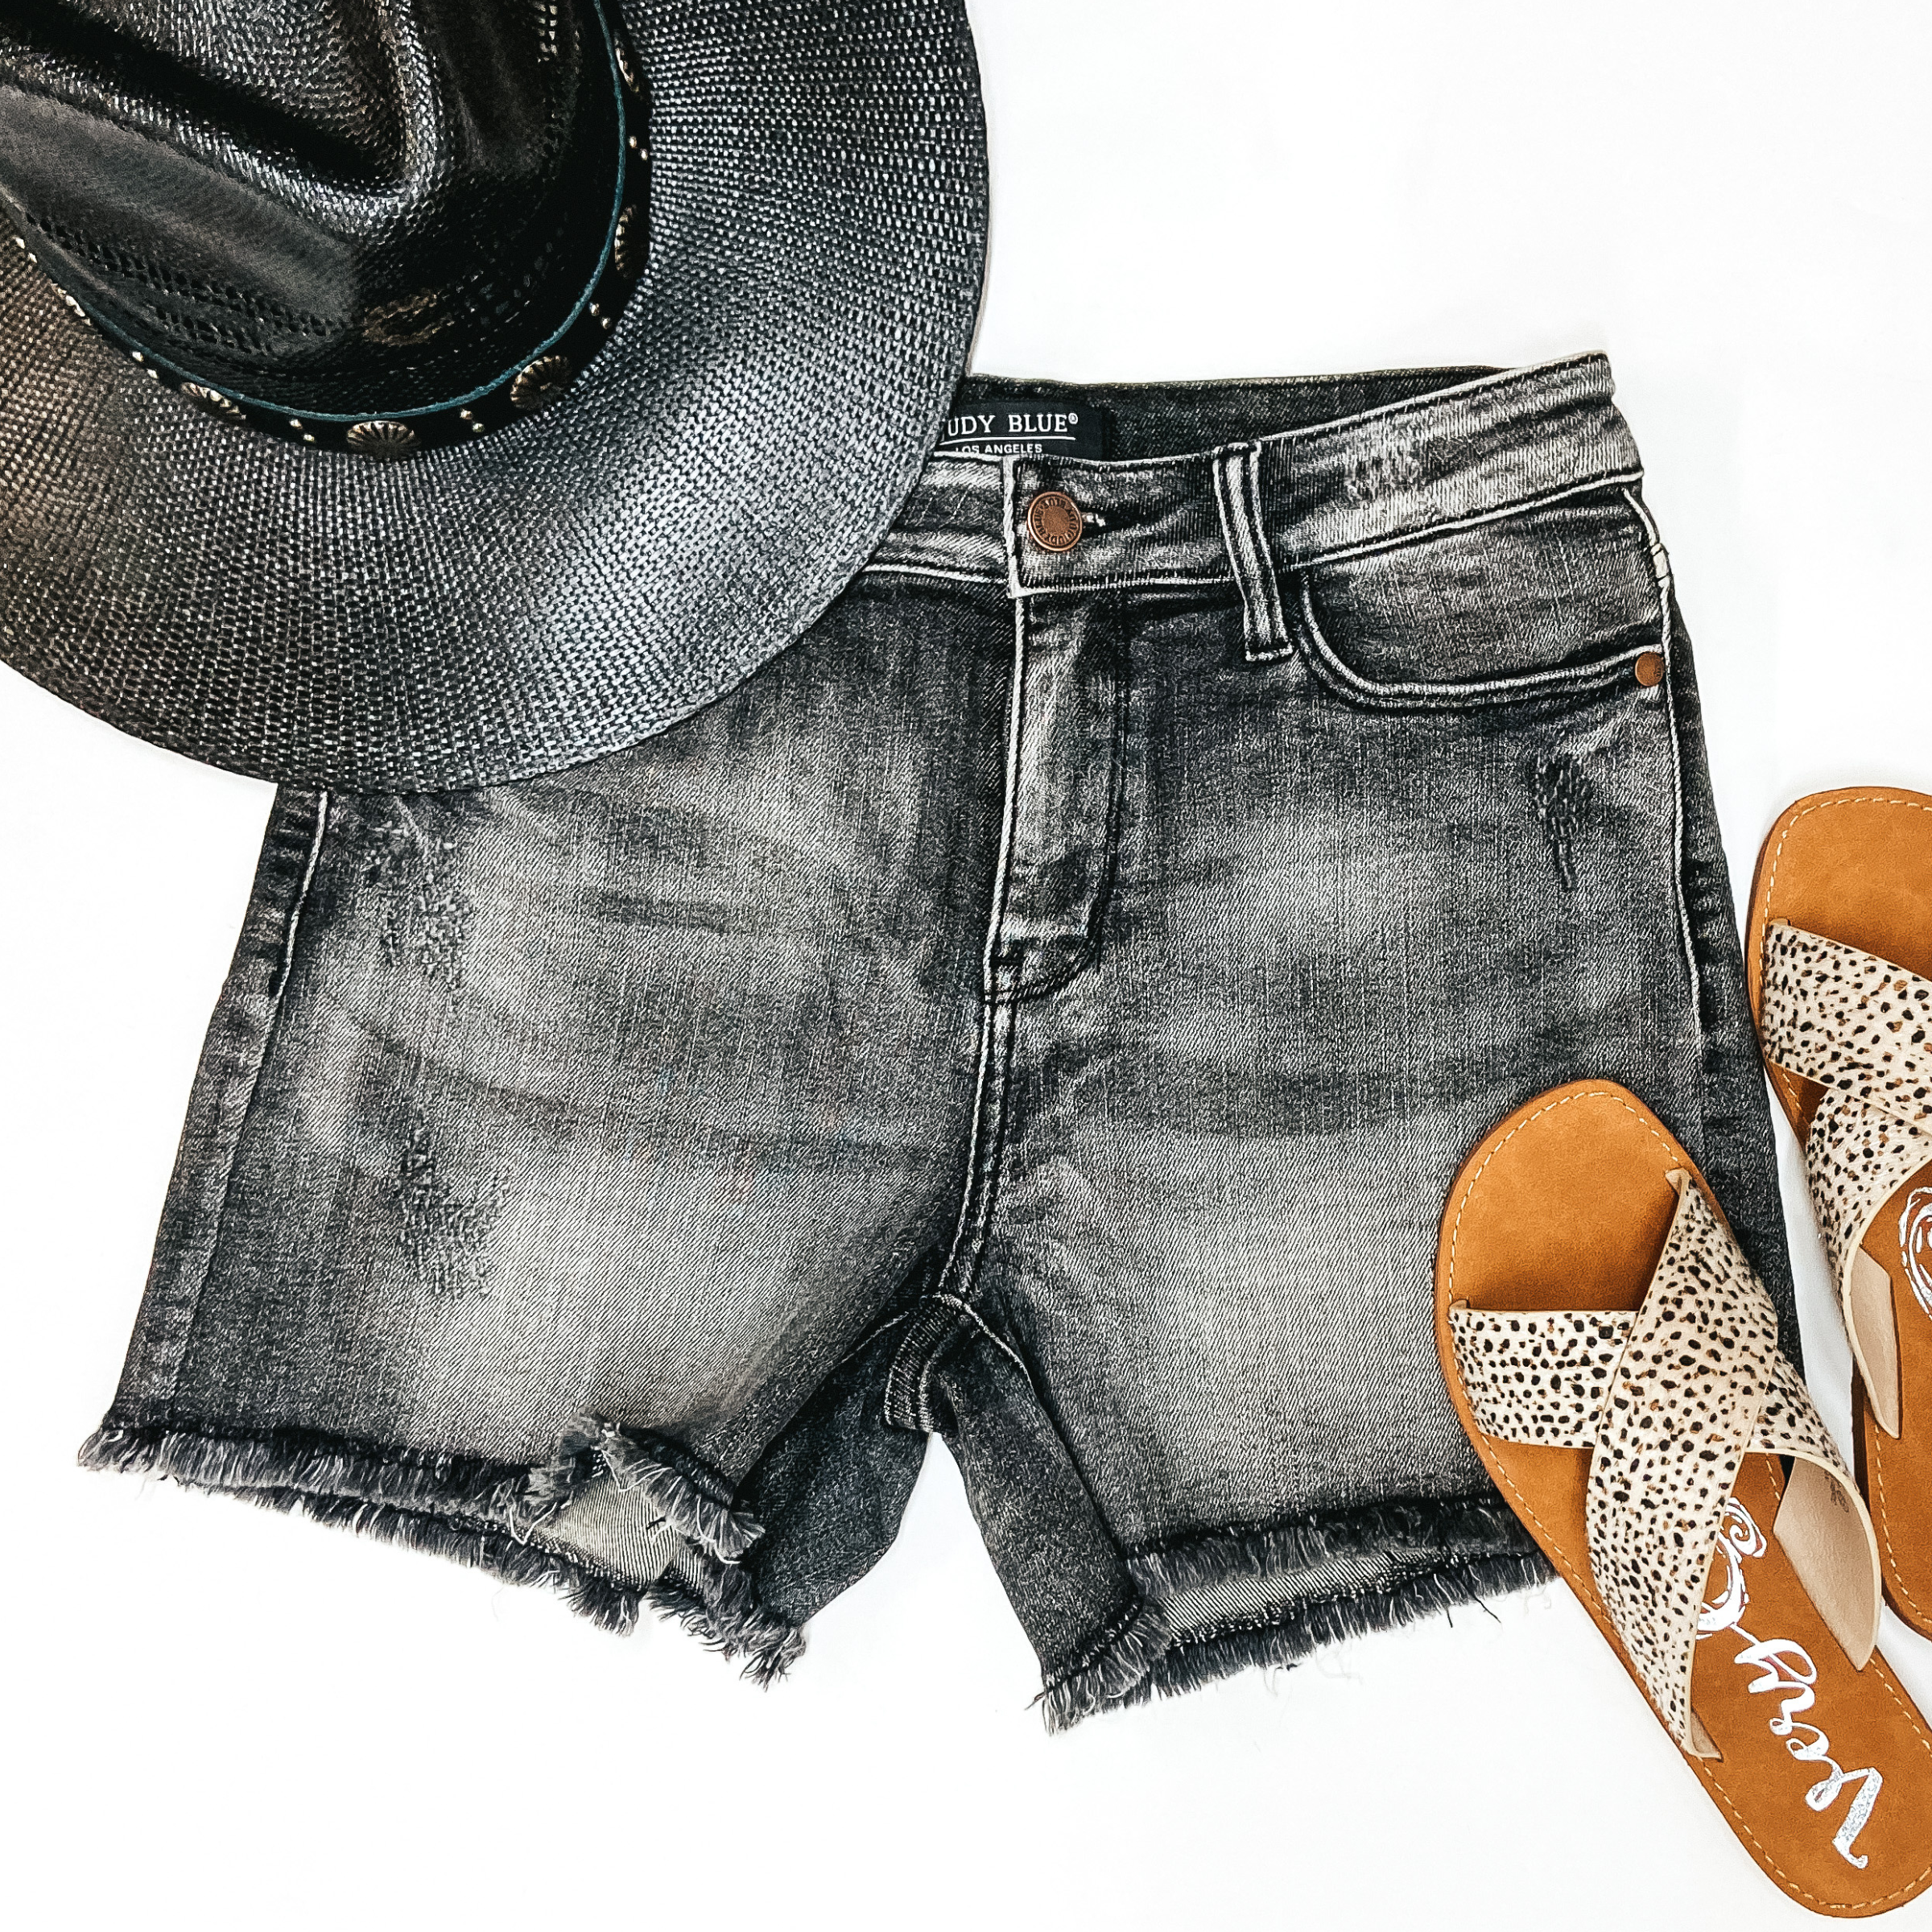 A pair of black wash denim shorts with a frayed hemline. Pictured on white background with black straw hat and dotted sandals.